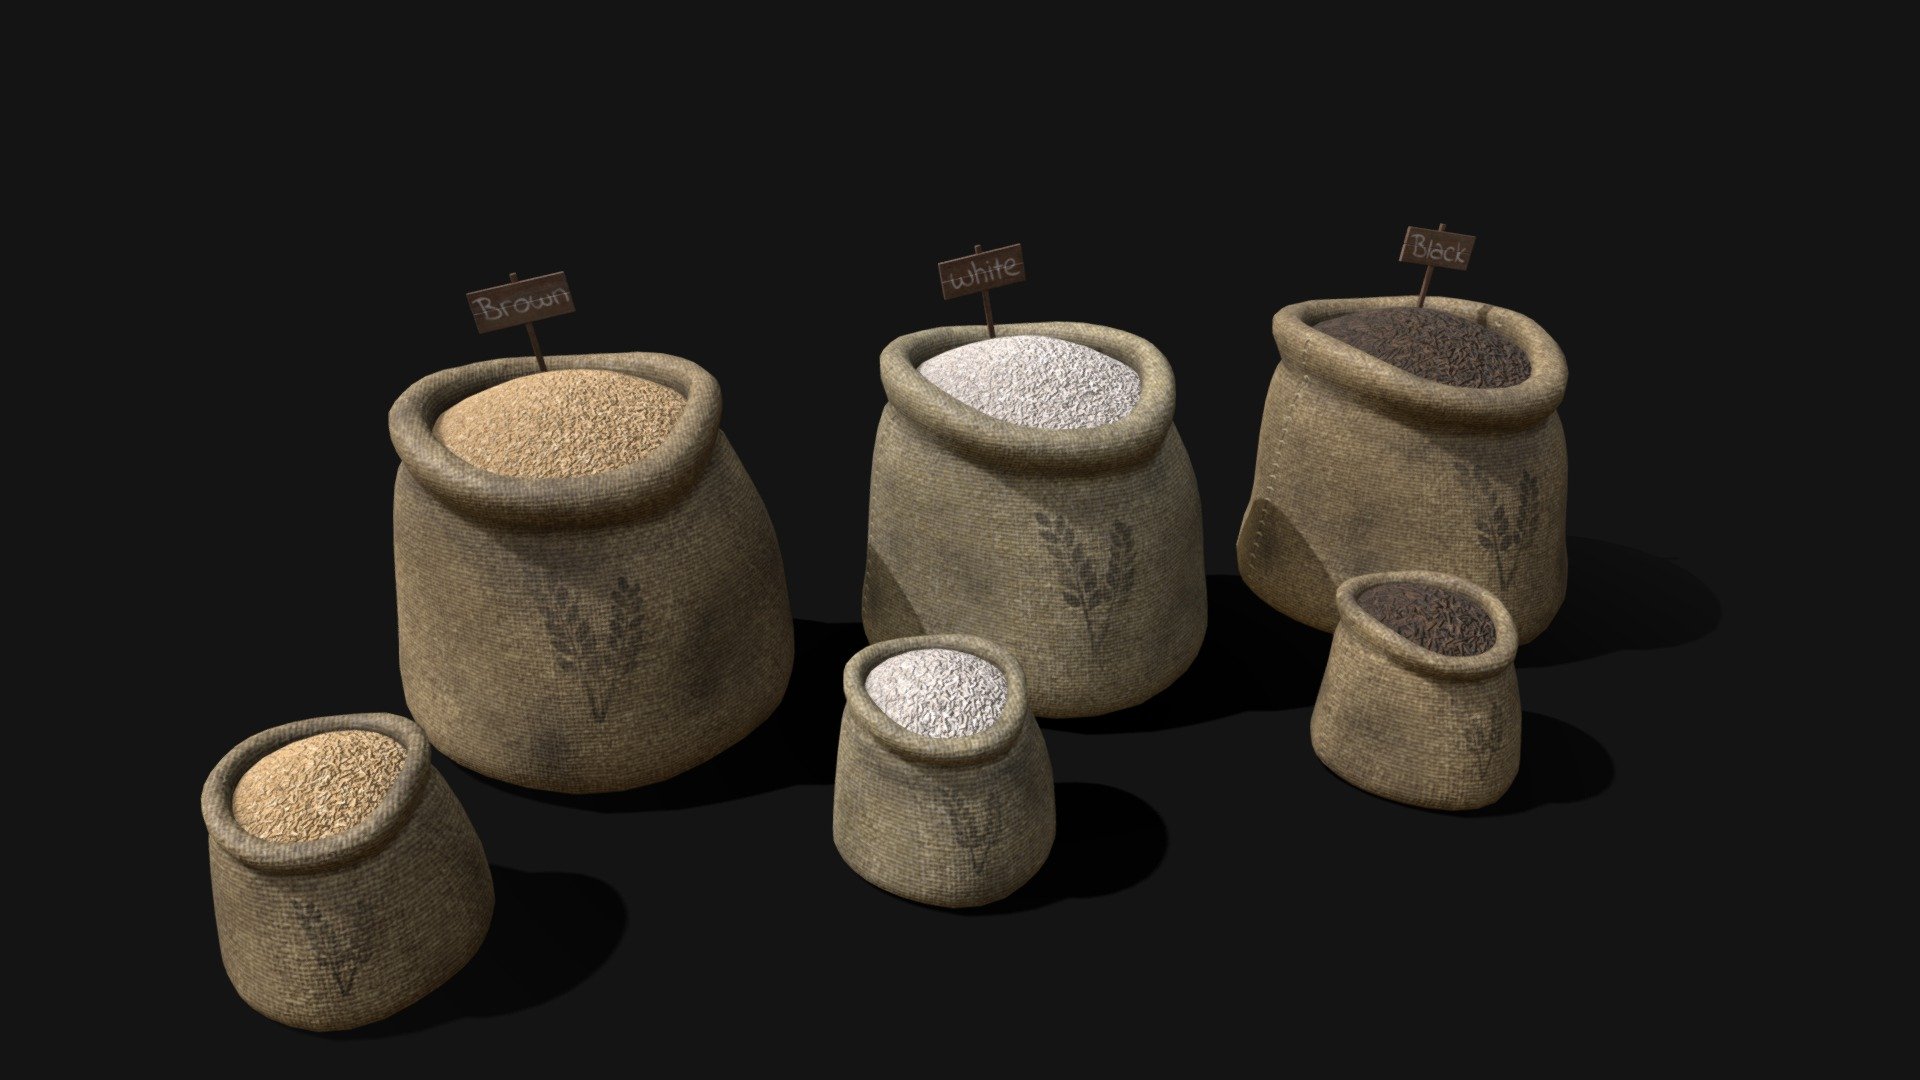 Rice Sacks 3D Model. This model contains the Rice Sacks itself 

All modeled in Maya, textured with Substance Painter.

The model was built to scale and is UV unwrapped properly

⦁   9252 tris. 

⦁   Contains: .FBX .OBJ and .DAE

⦁   Model has clean topology. No Ngons.

⦁   Built to scale

⦁   Unwrapped UV Map

⦁   4K Texture set

⦁   High quality details

⦁   Based on real life references

⦁   Renders done in Marmoset Toolbag

Polycount: 

Verts 4818

Edges 9474

Faces 4683

Tris 9252

If you have any questions please feel free to ask me 3d model